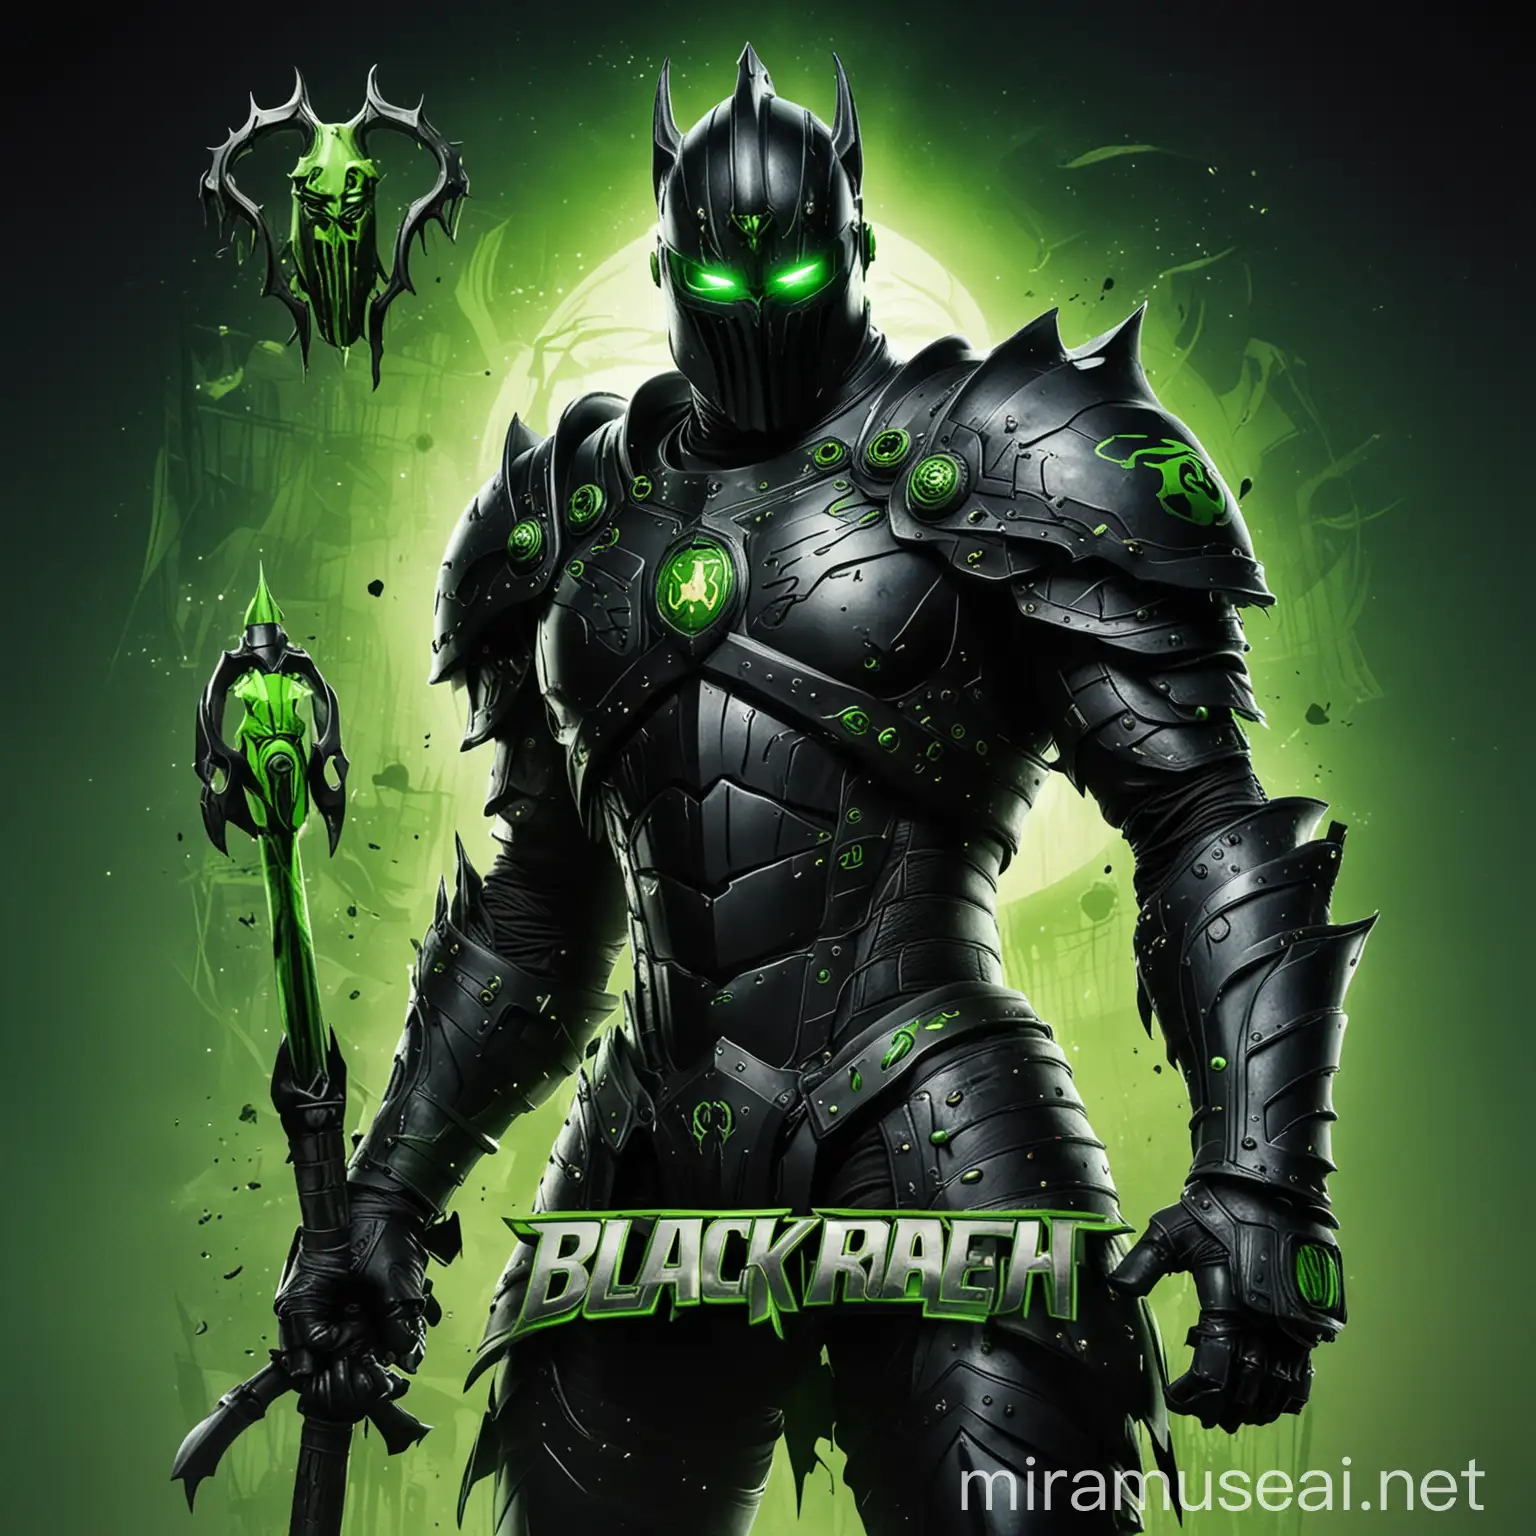 Mysterious Black Knight Warrior with Green and Black Theme Featuring Ben 10 Logo